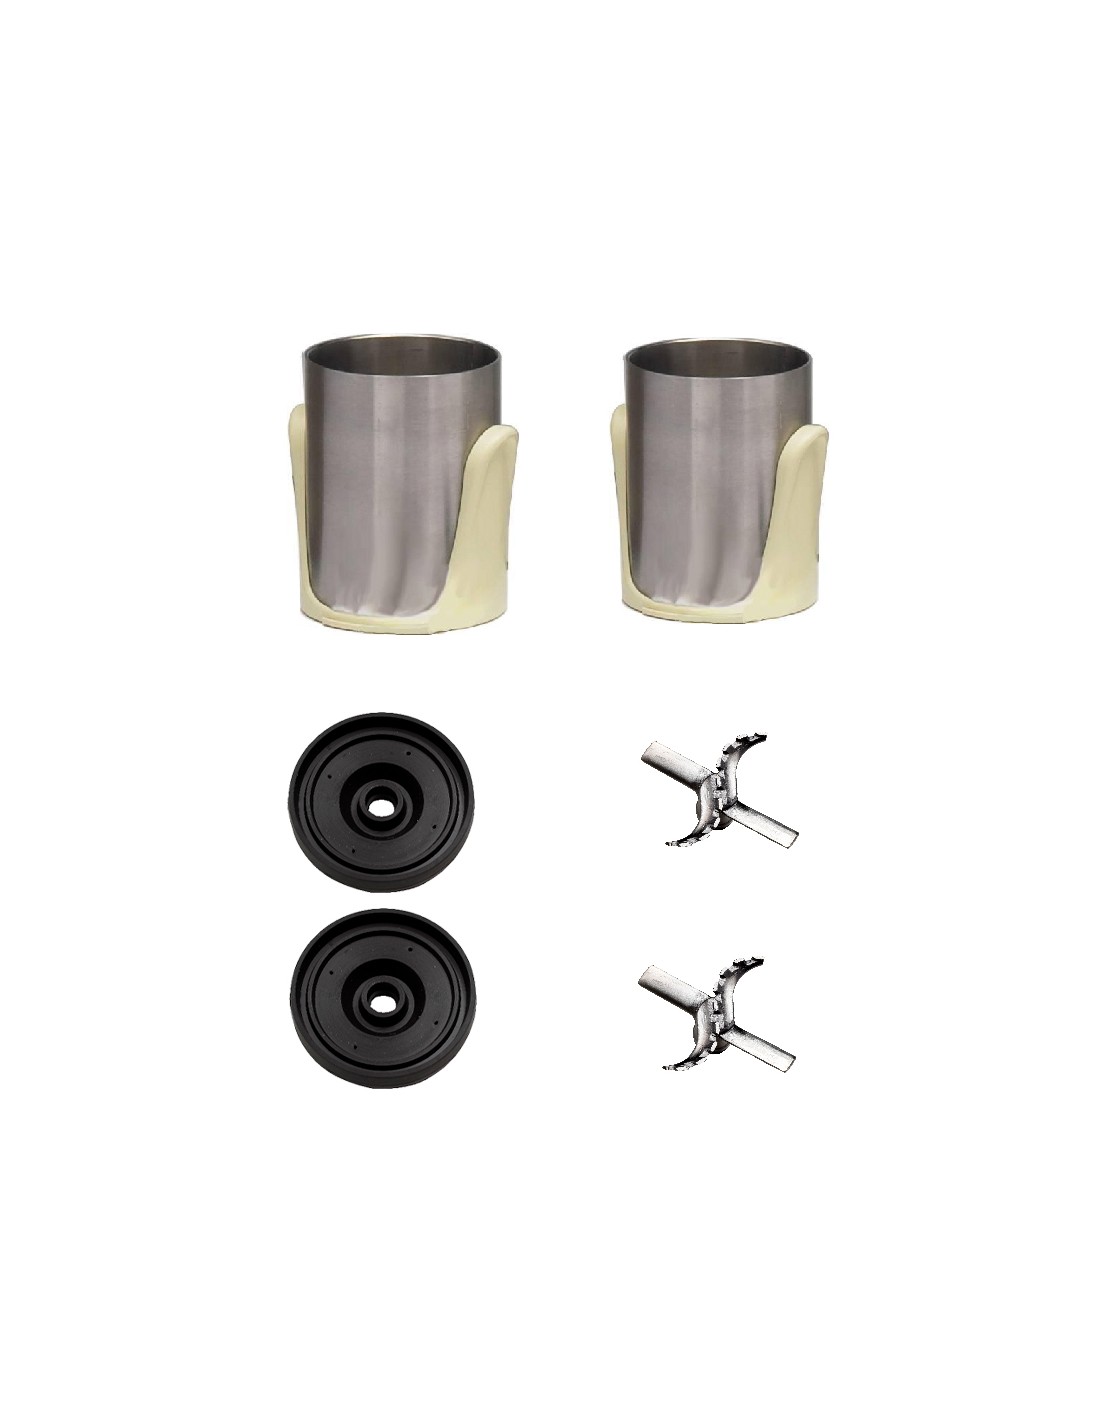 Accessories kit 2 stainless steel and 2 gasket holders and 2 stainless steel blades